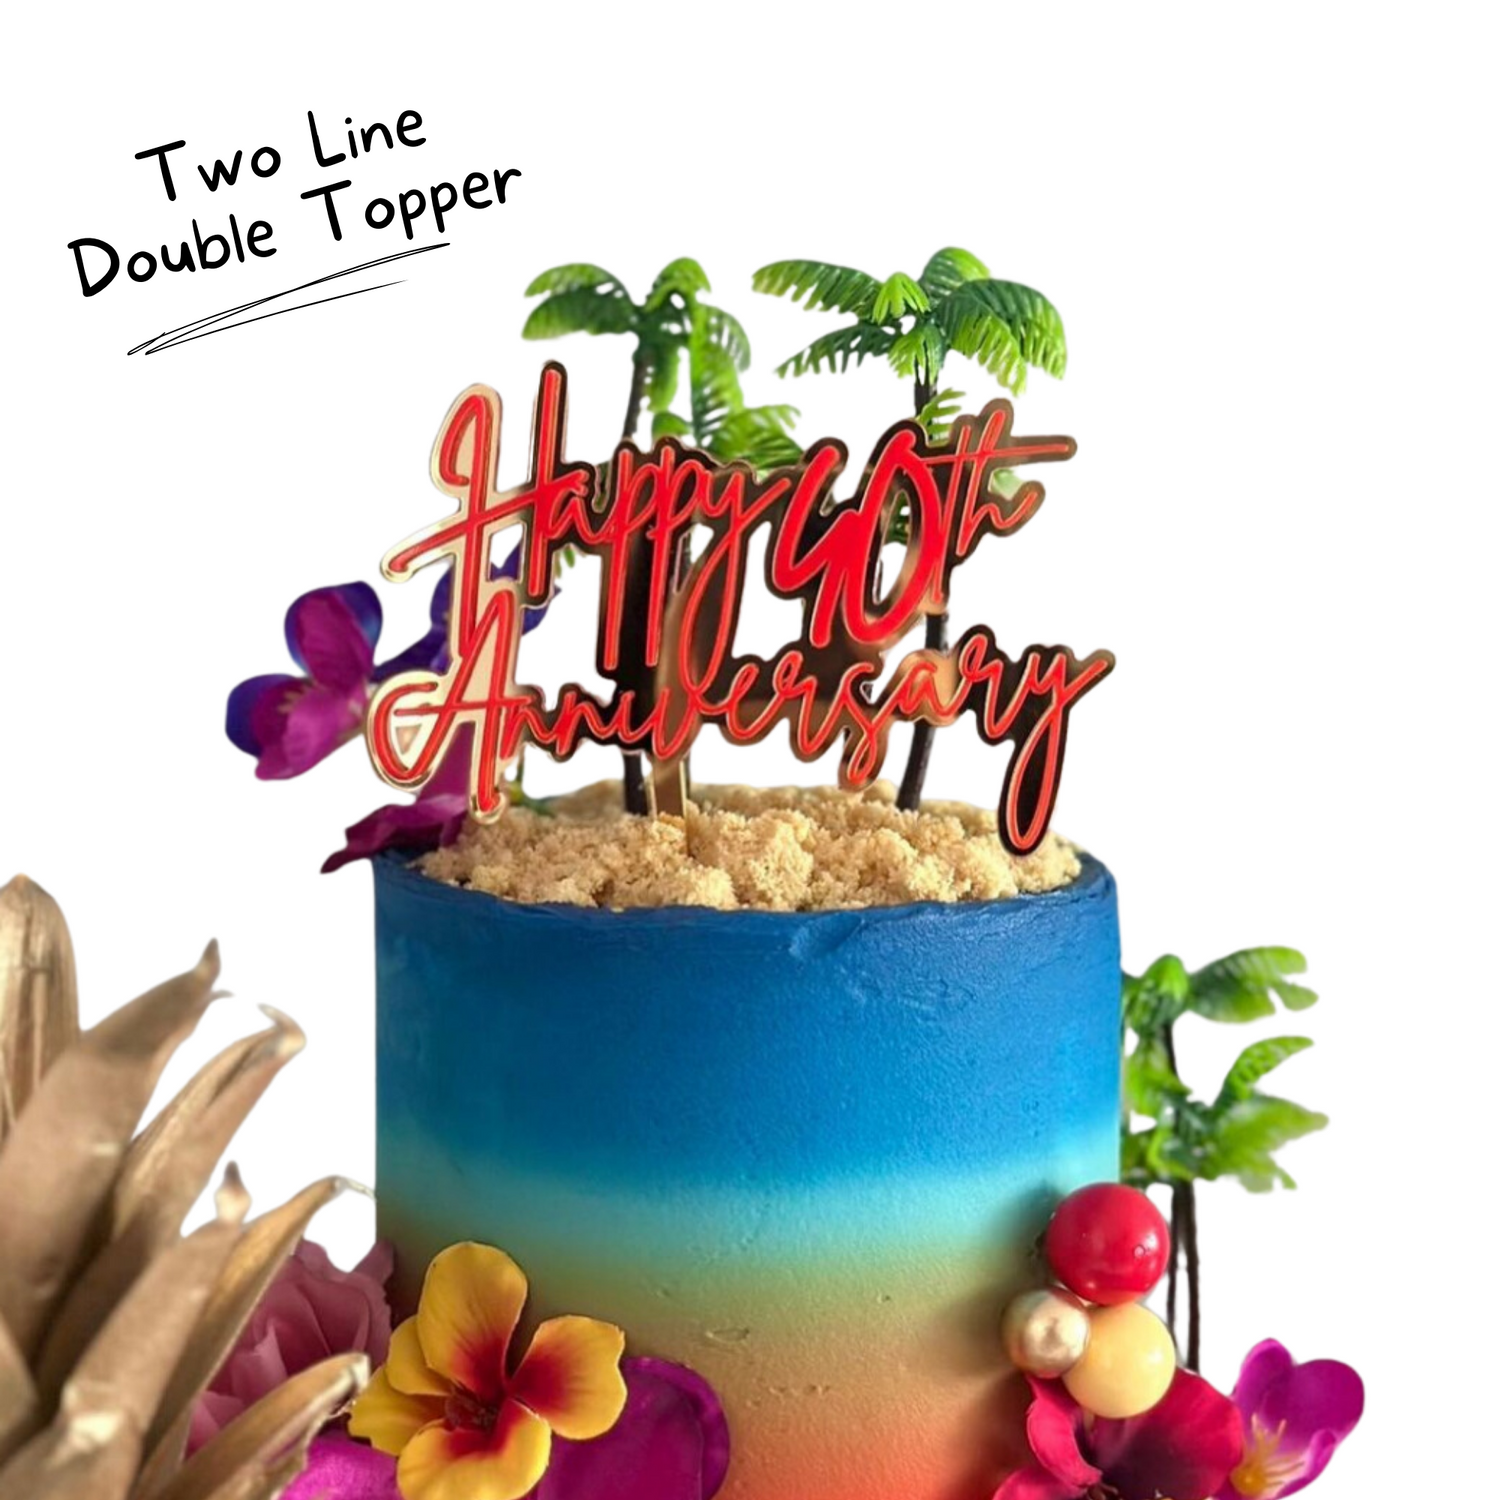 Two Line Double Cake Topper